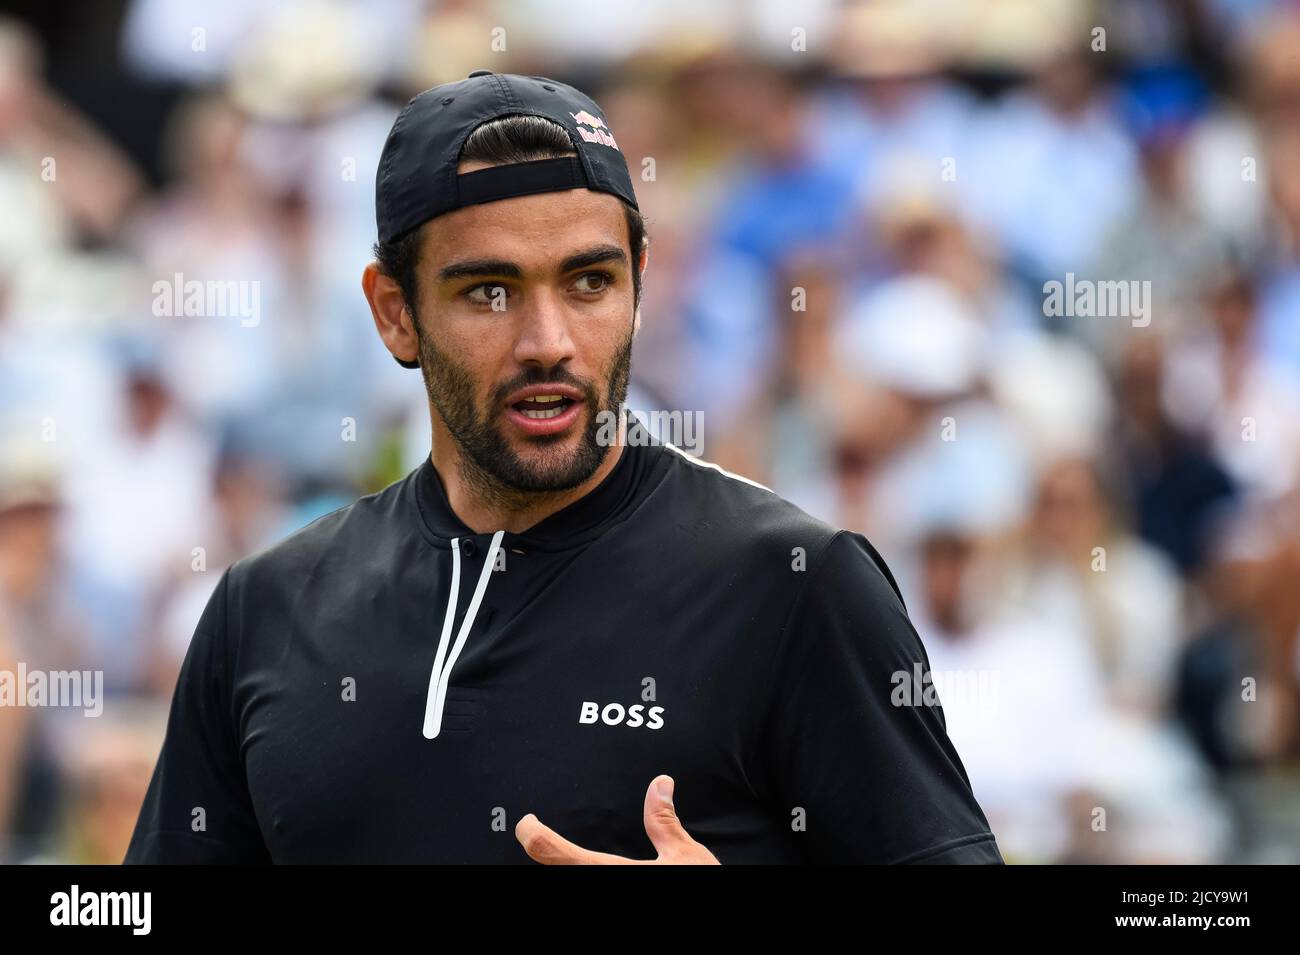 London, UK.  16 June 2022.  Matteo Berrettini (ITA) wins his round 2 men’s singles match against Denis Kudla (USA) by two sets to one at the Cinch Championships at The Queen’s Club in west London. Credit: Stephen Chung / Alamy Live News Stock Photo